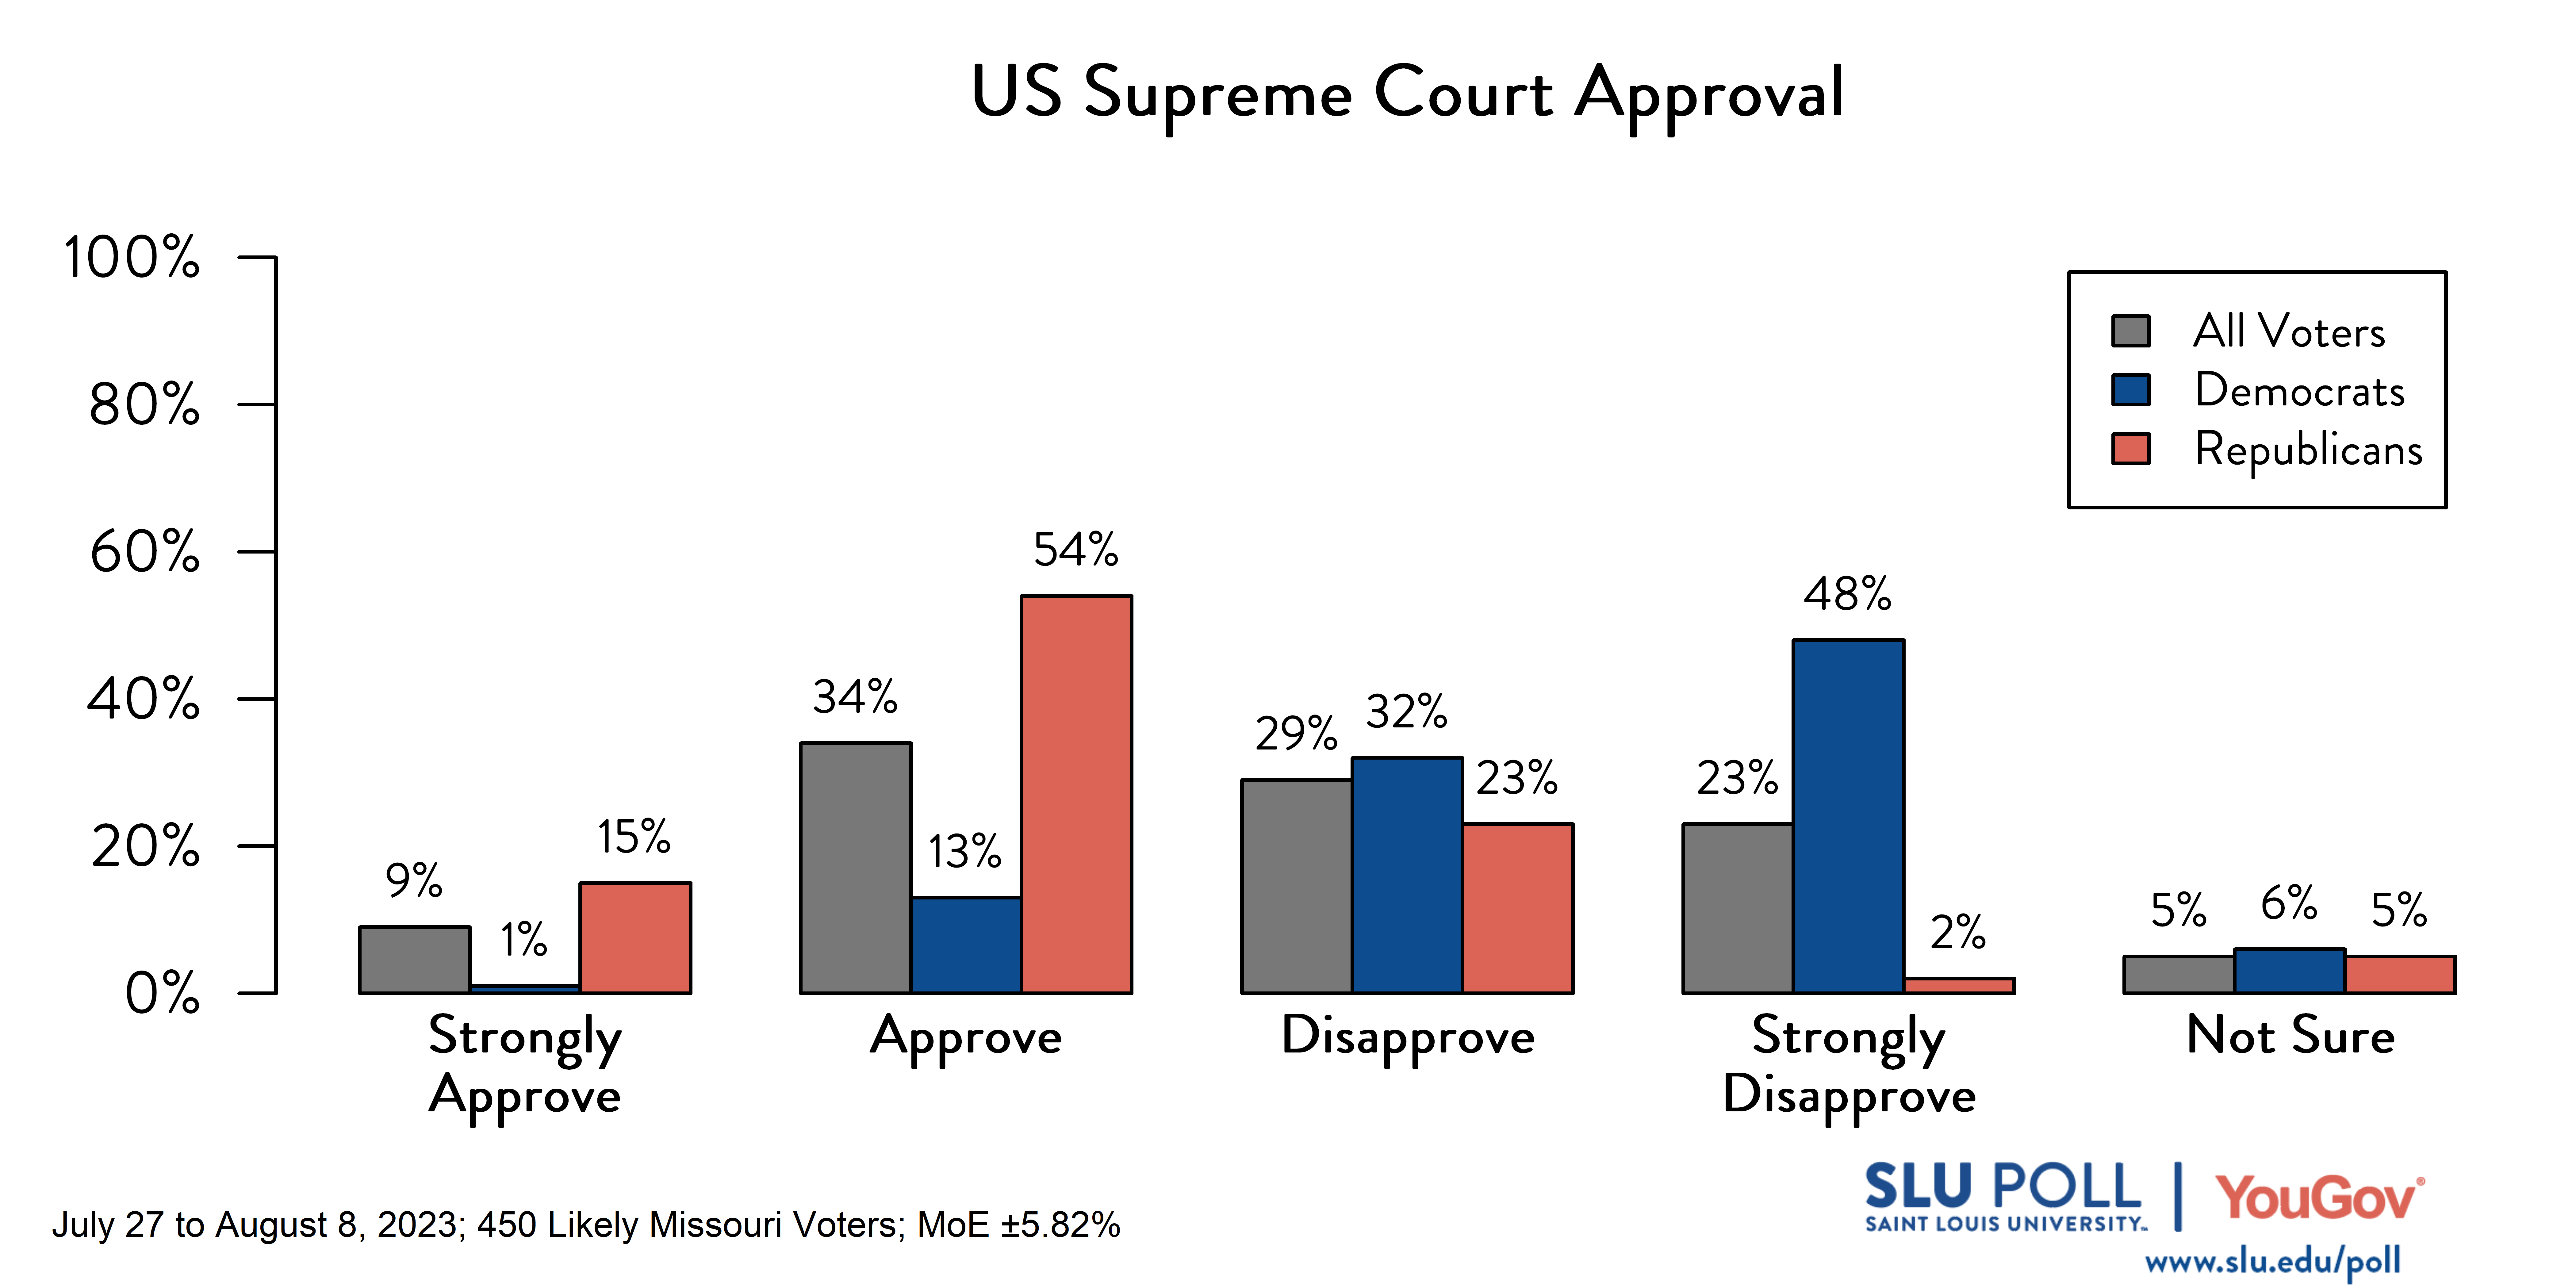 Likely voters' responses to 'Do you approve or disapprove of the way each is doing their job: The US Supreme Court?': 9% Strongly approve, 34% Approve, 29% Disapprove, 23% Strongly disapprove, and 5% Not sure. Democratic voters' responses: ' 1% Strongly approve, 13% Approve, 32% Disapprove, 48% Strongly disapprove, and 6% Not sure. Republican voters' responses: 15% Strongly approve, 54% Approve, 23% Disapprove, 2% Strongly disapprove, and 5% Not sure.